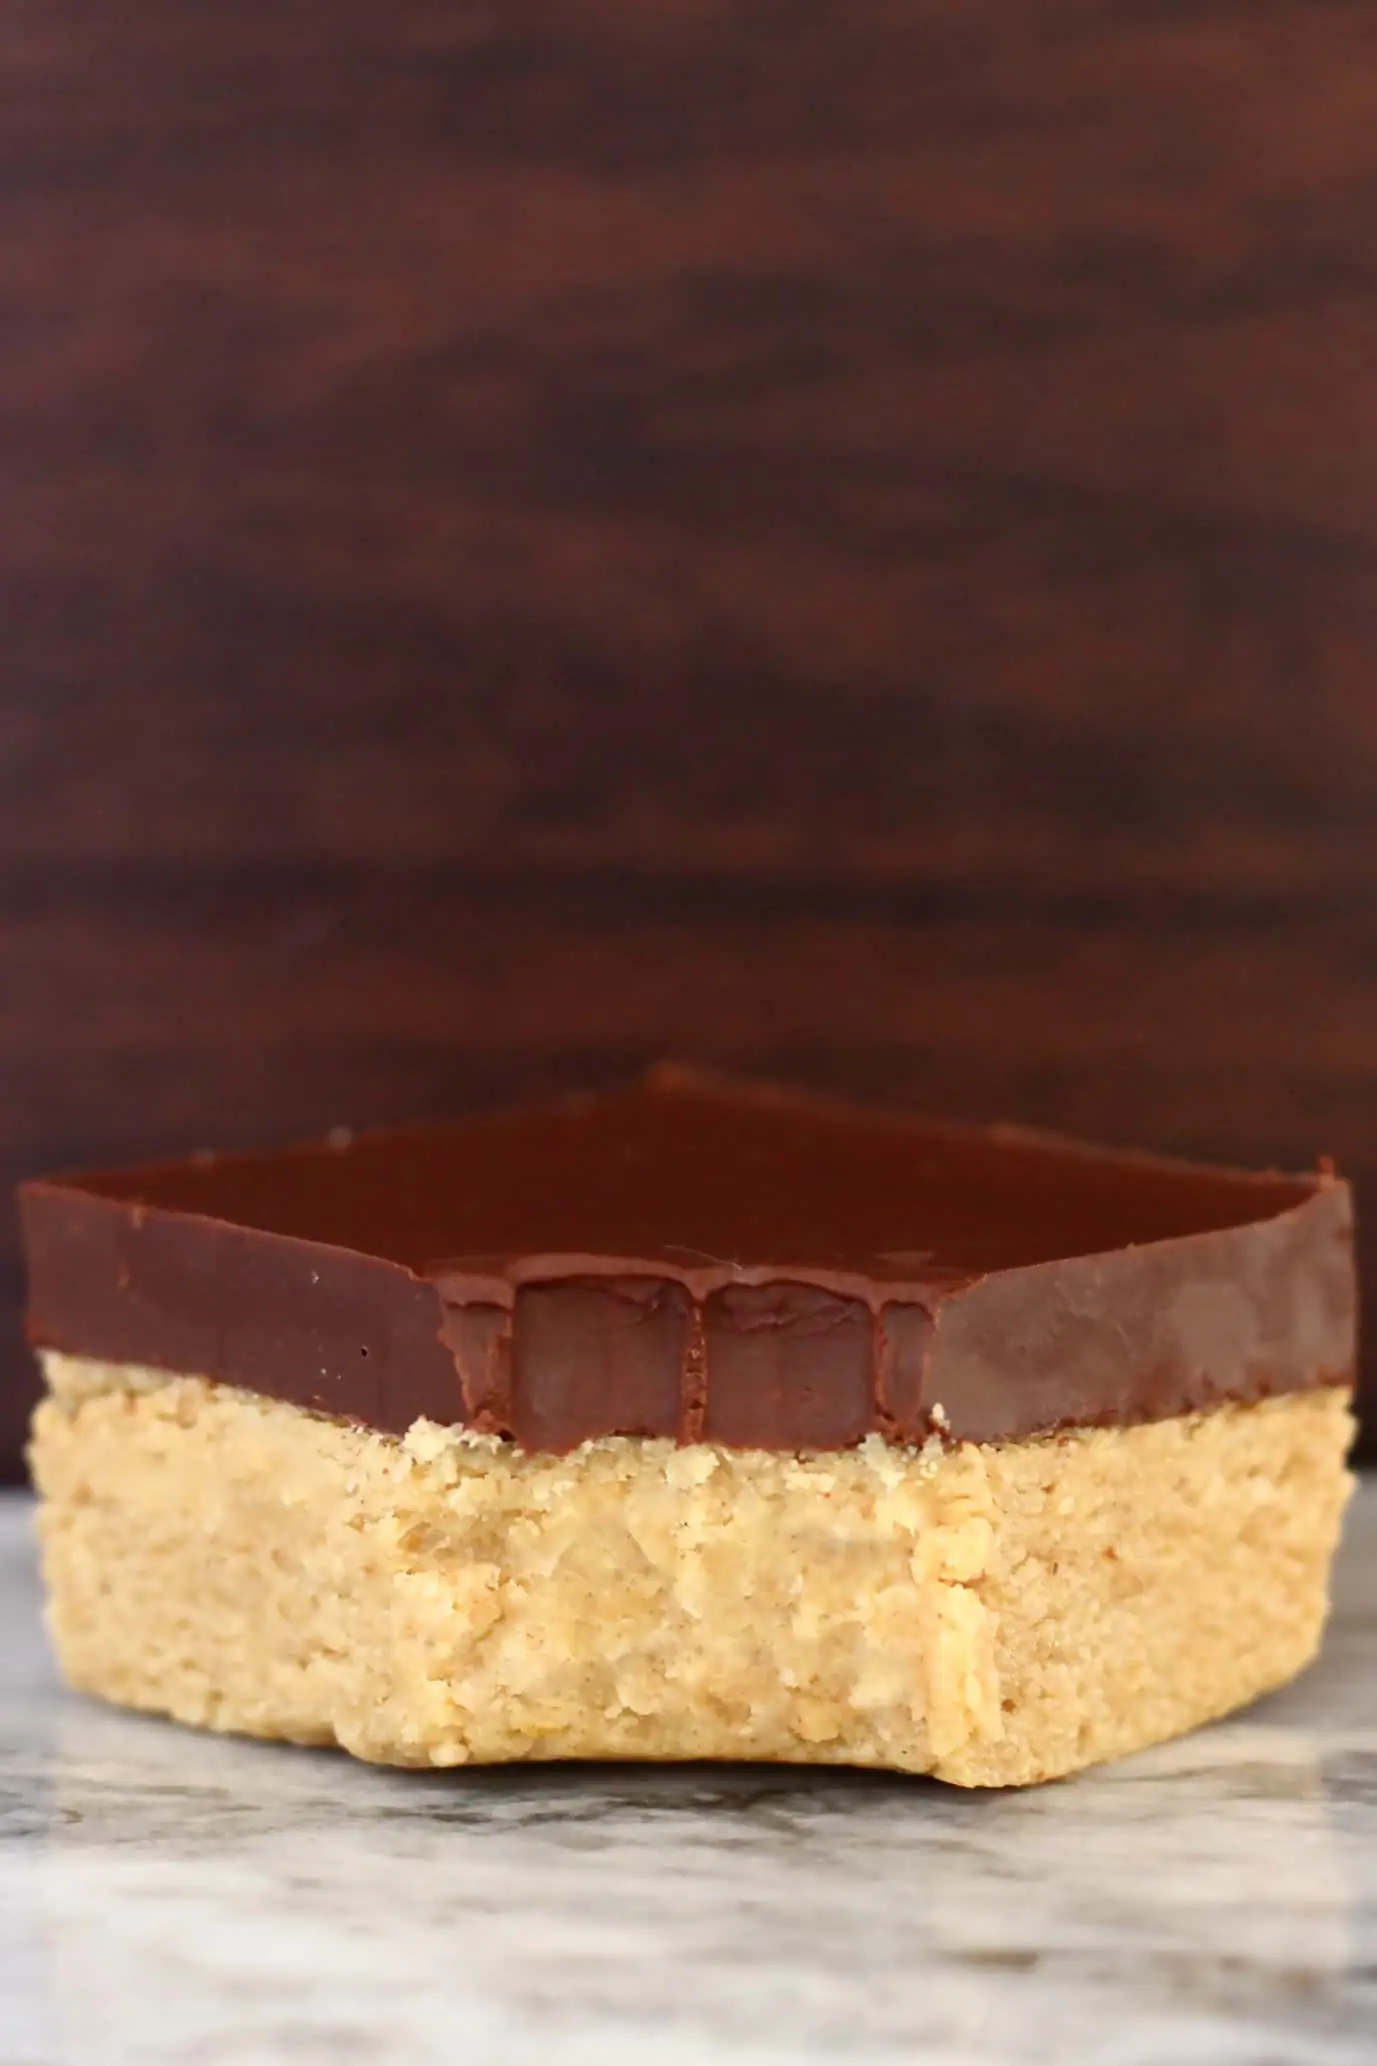 A vegan chocolate peanut butter bar topped with dark chocolate with a bite taken out of it